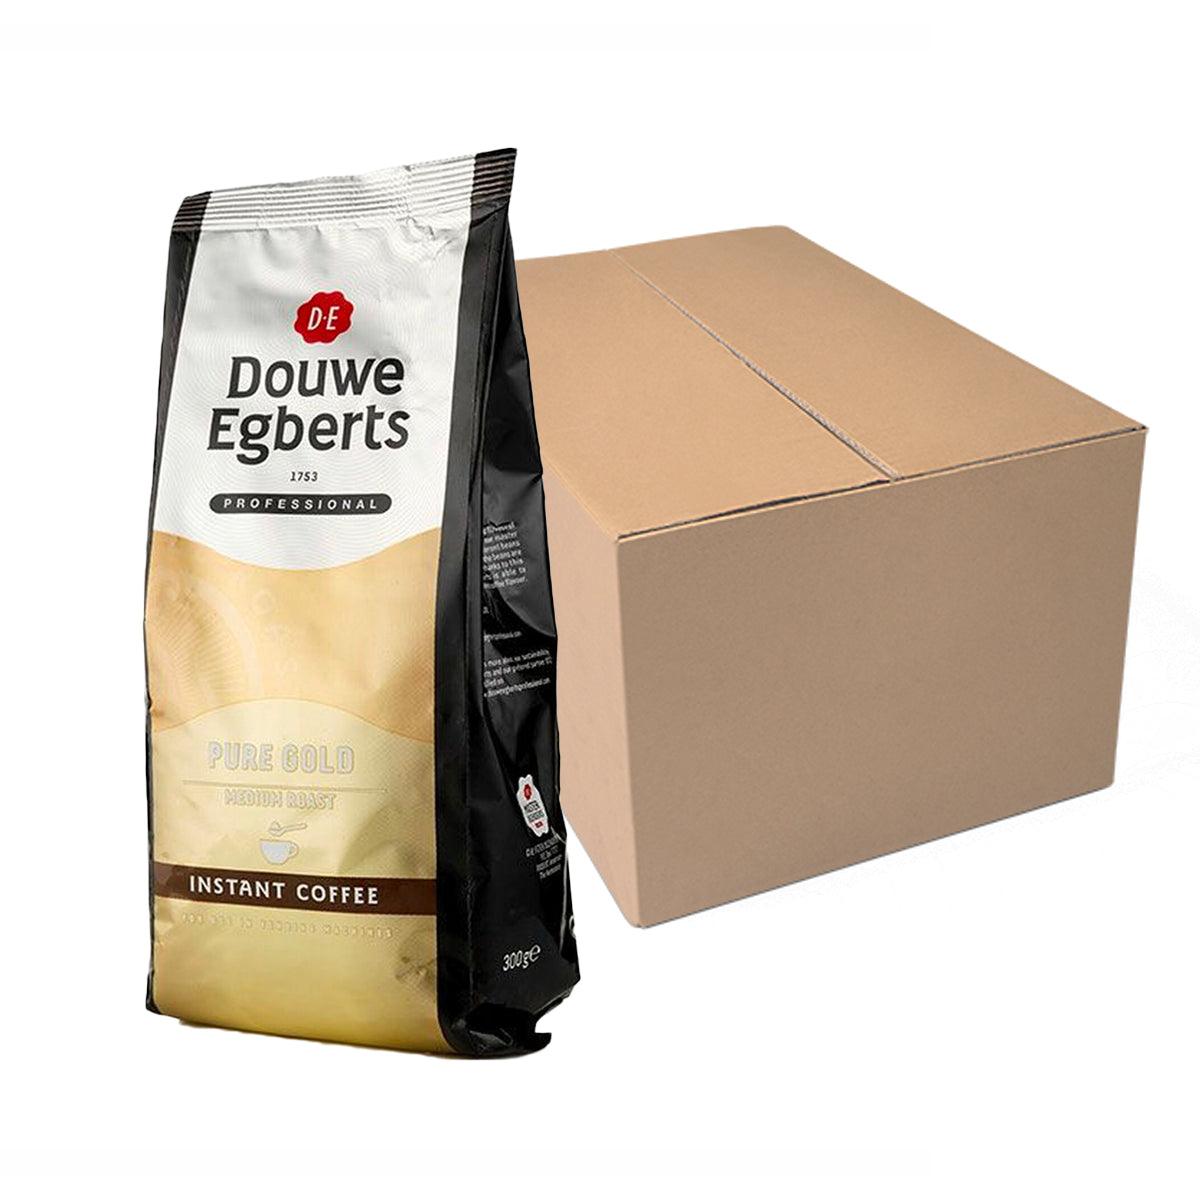 Douwe Egberts Pure Gold - Vending Coffee - 10 x 300g Case - Vending Superstore